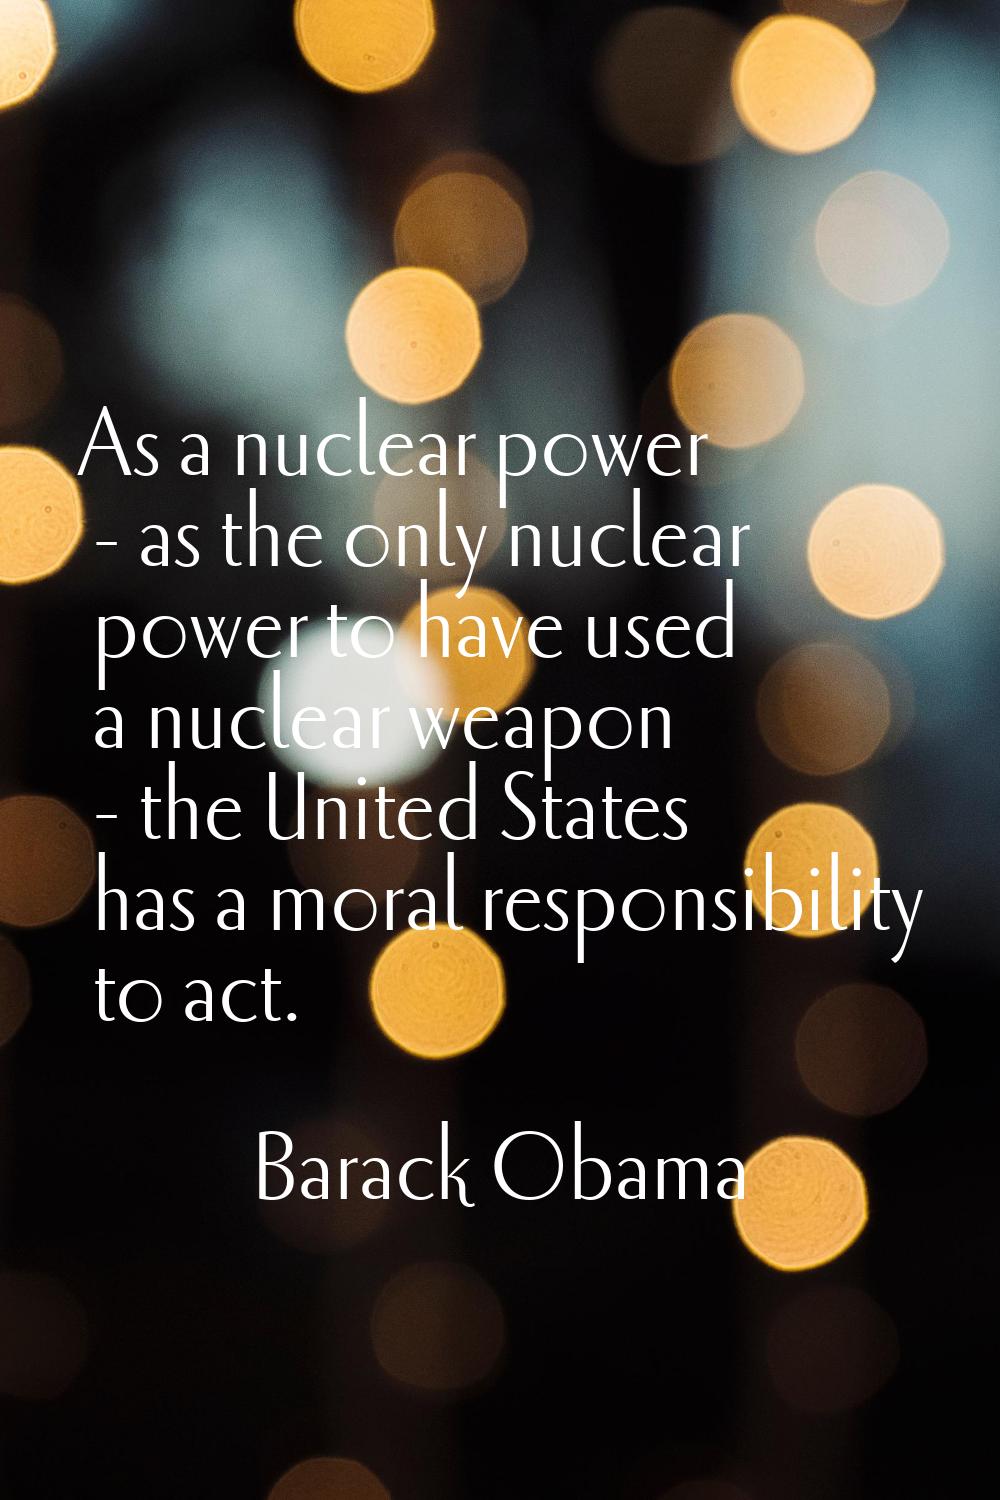 As a nuclear power - as the only nuclear power to have used a nuclear weapon - the United States ha